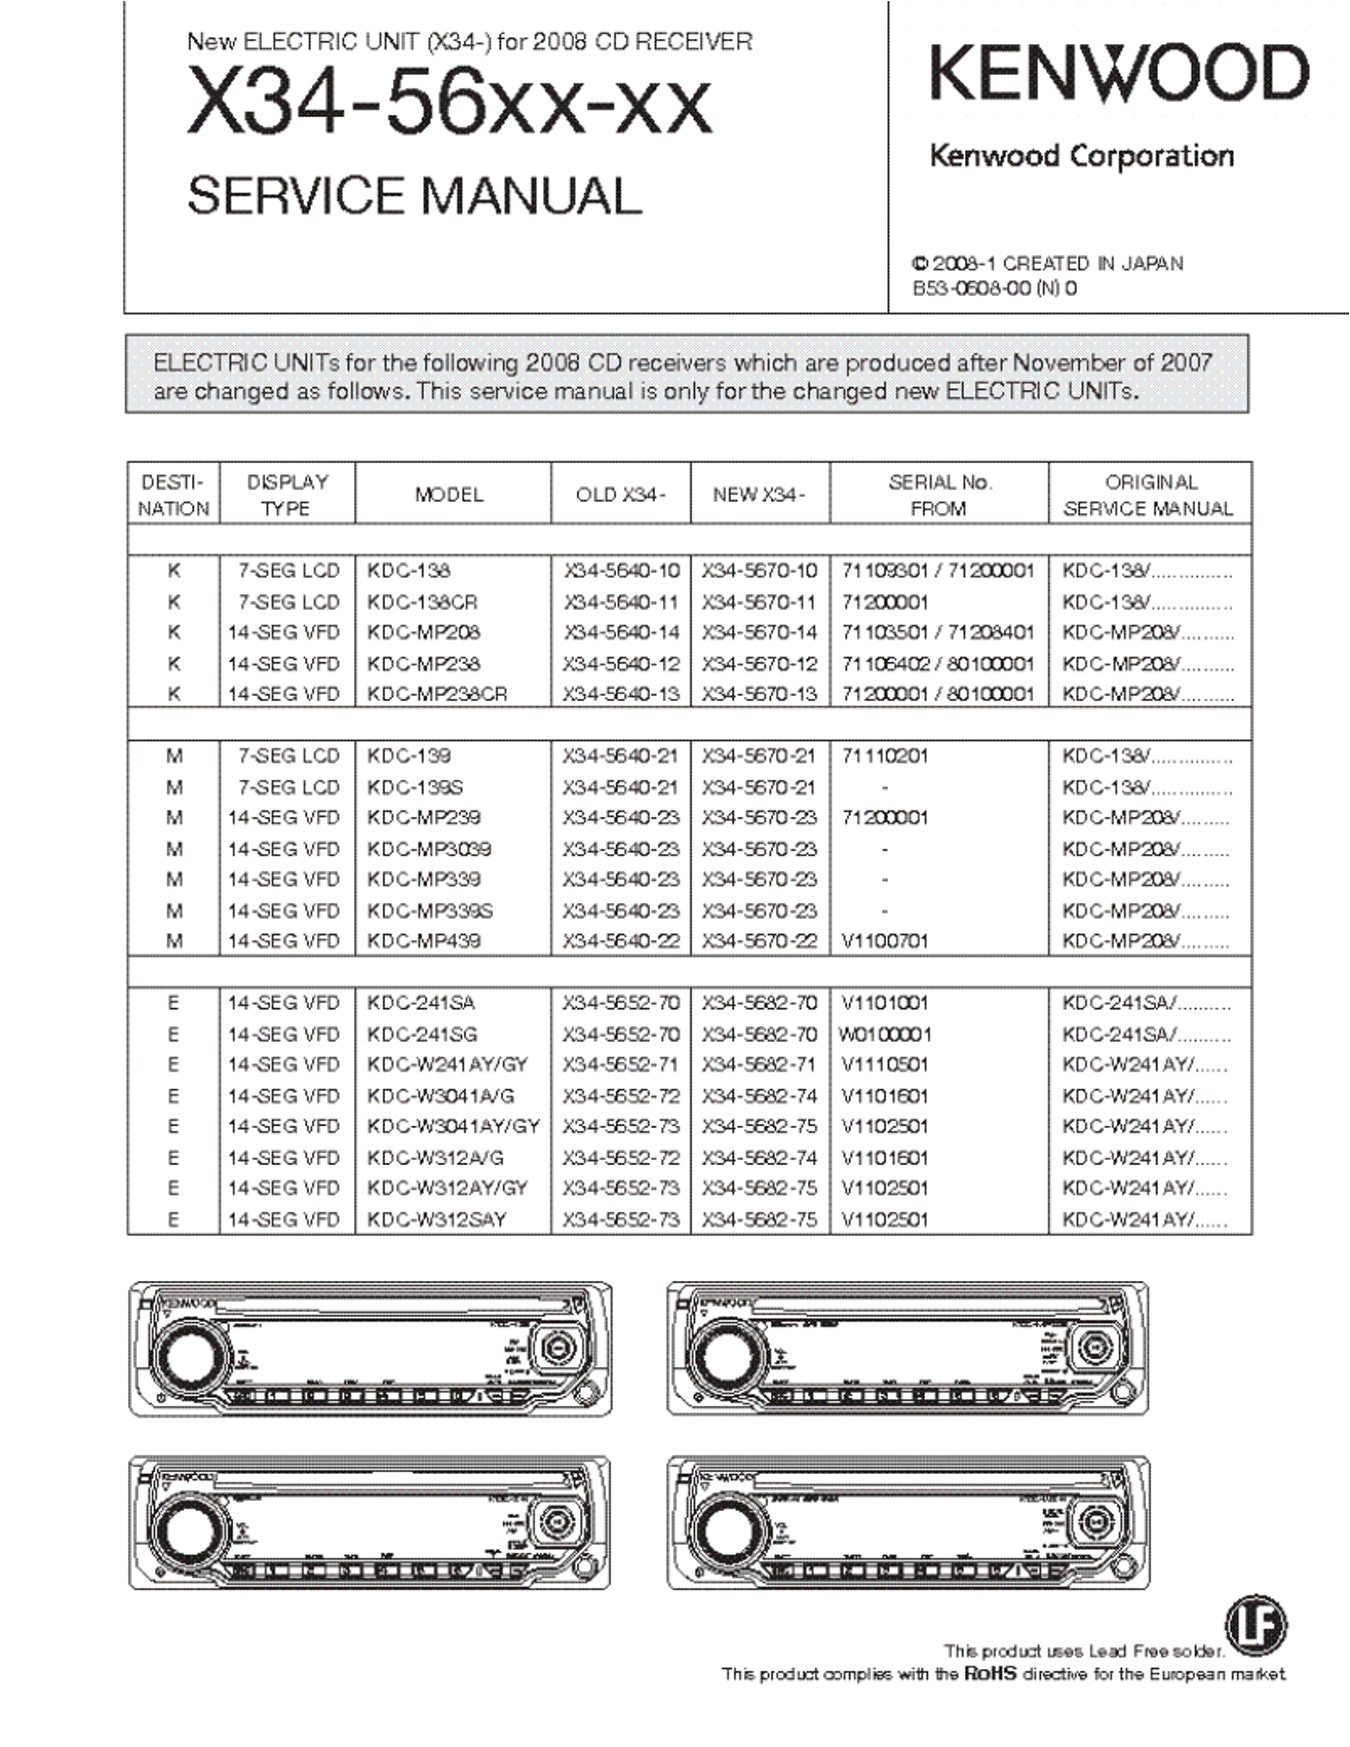 kenwood kdc 138 wiring diagram awesome for of 5b3ed9cf5fa9b at kenwood kdc138 wiring diagram jpg